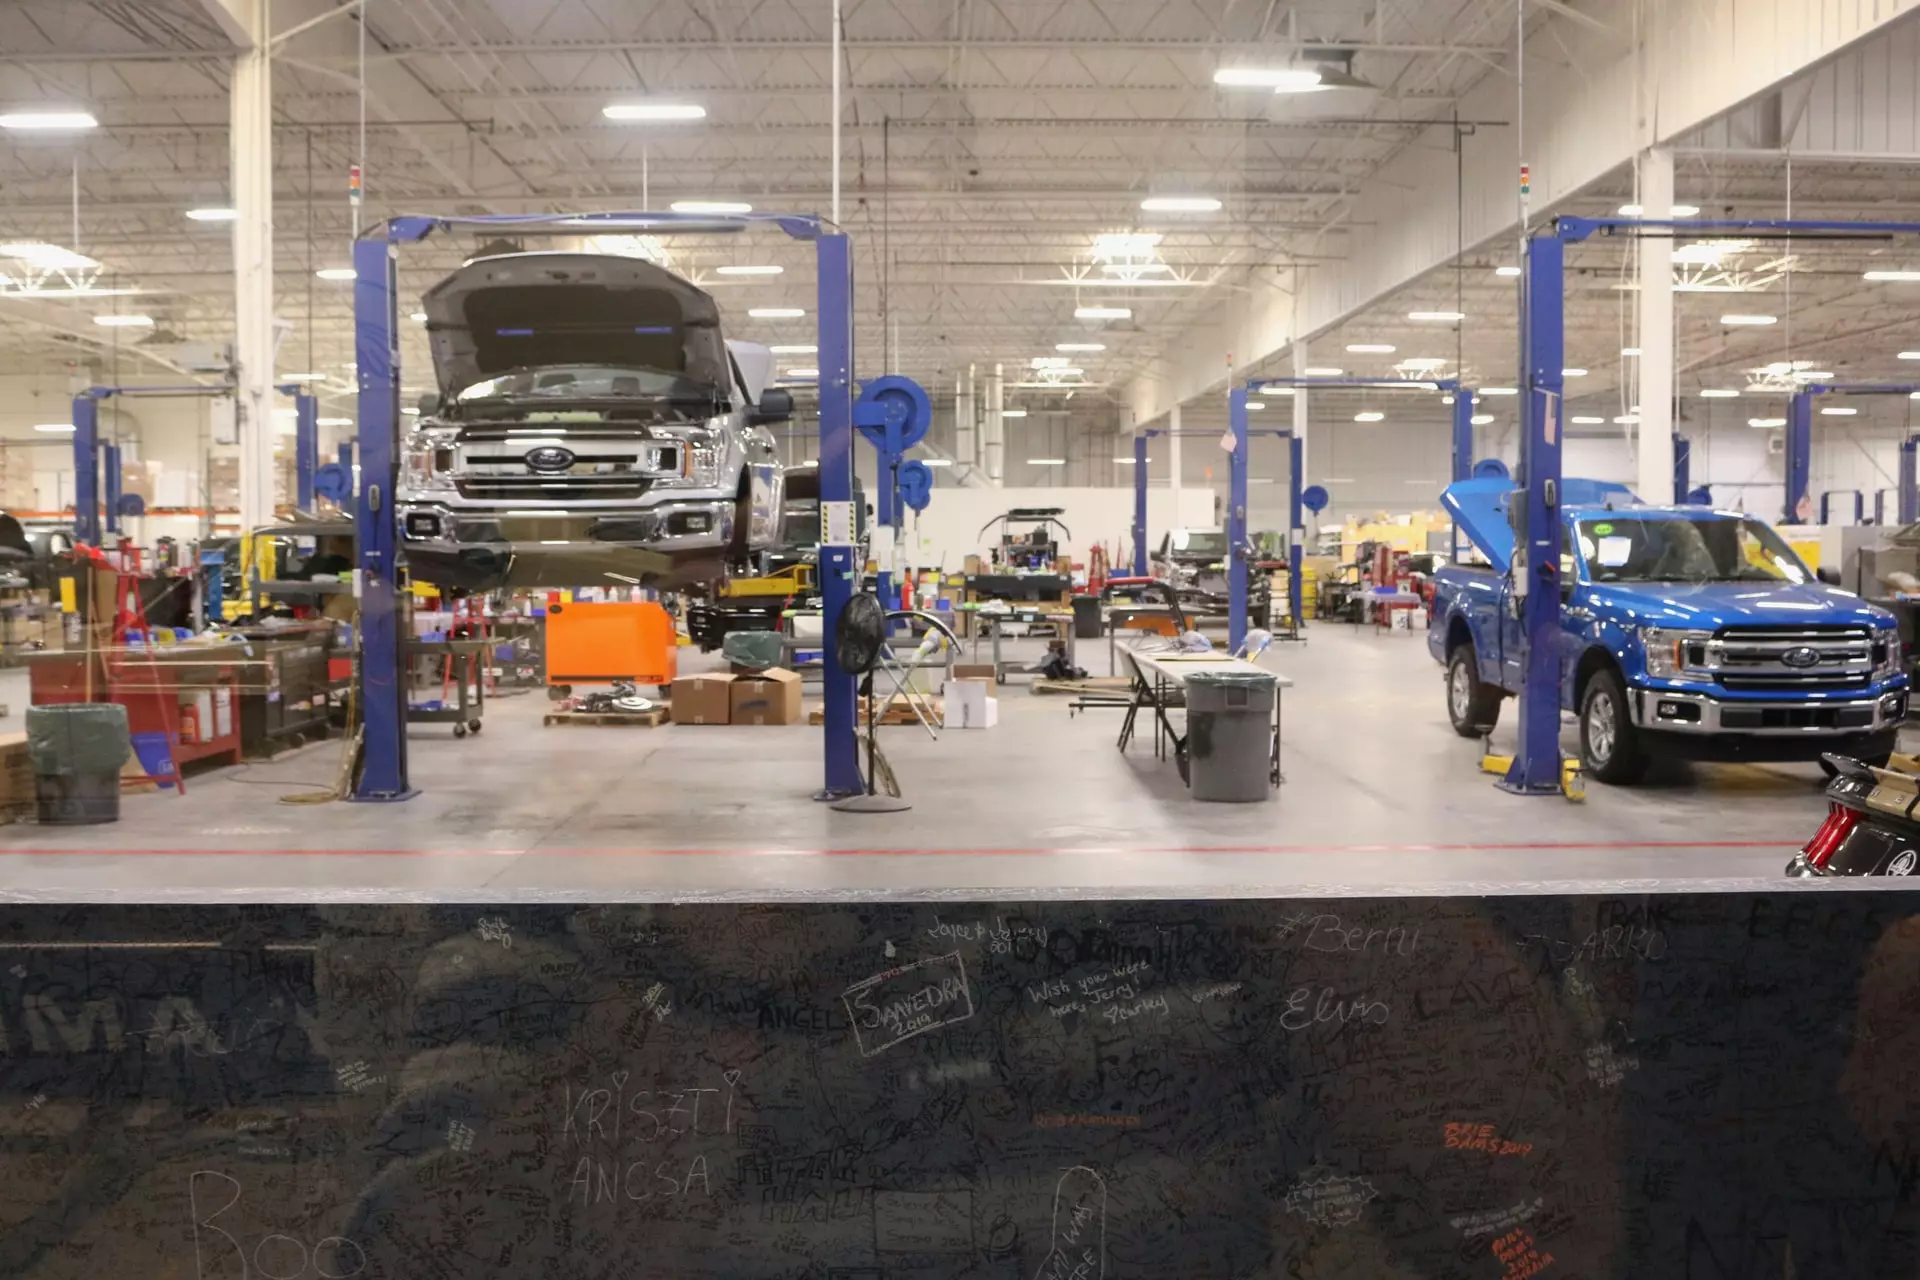 Here is a list of questions you should ask before setting up a collision repair shop.